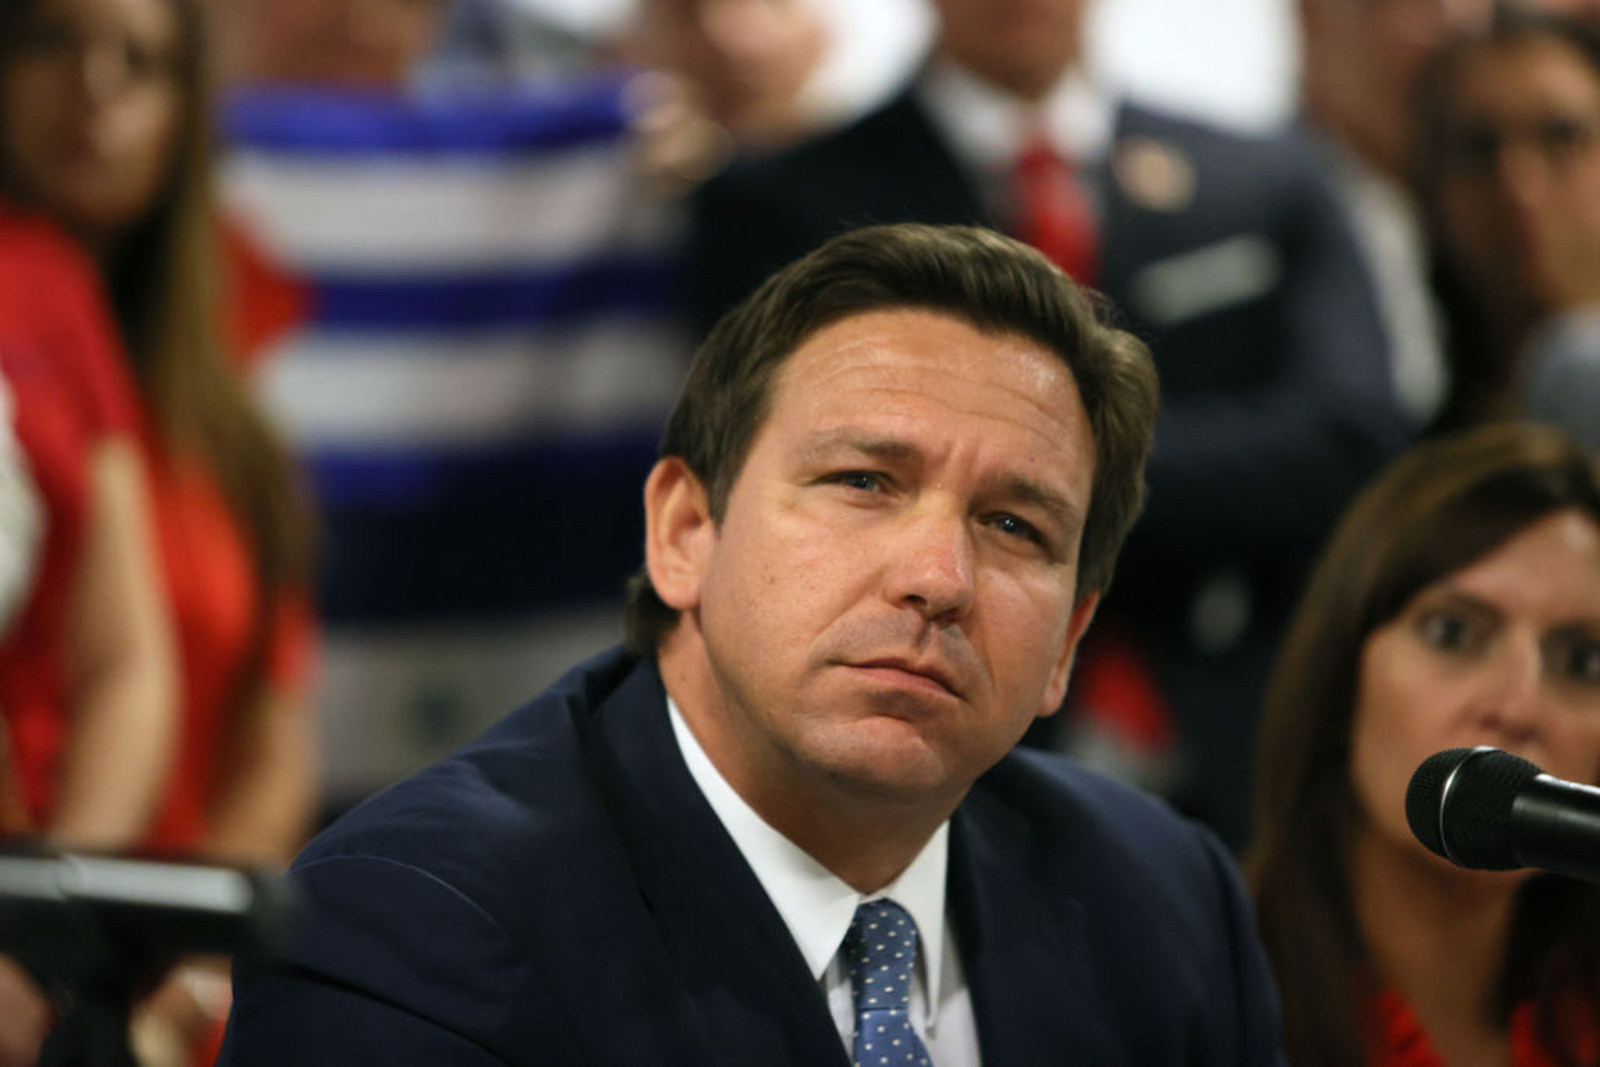 Florida Govenor Ron DeSantis takes part in a roundtable discussion at the American Museum of the Cuba Diaspora in Miami on July 13. Photo: TNS